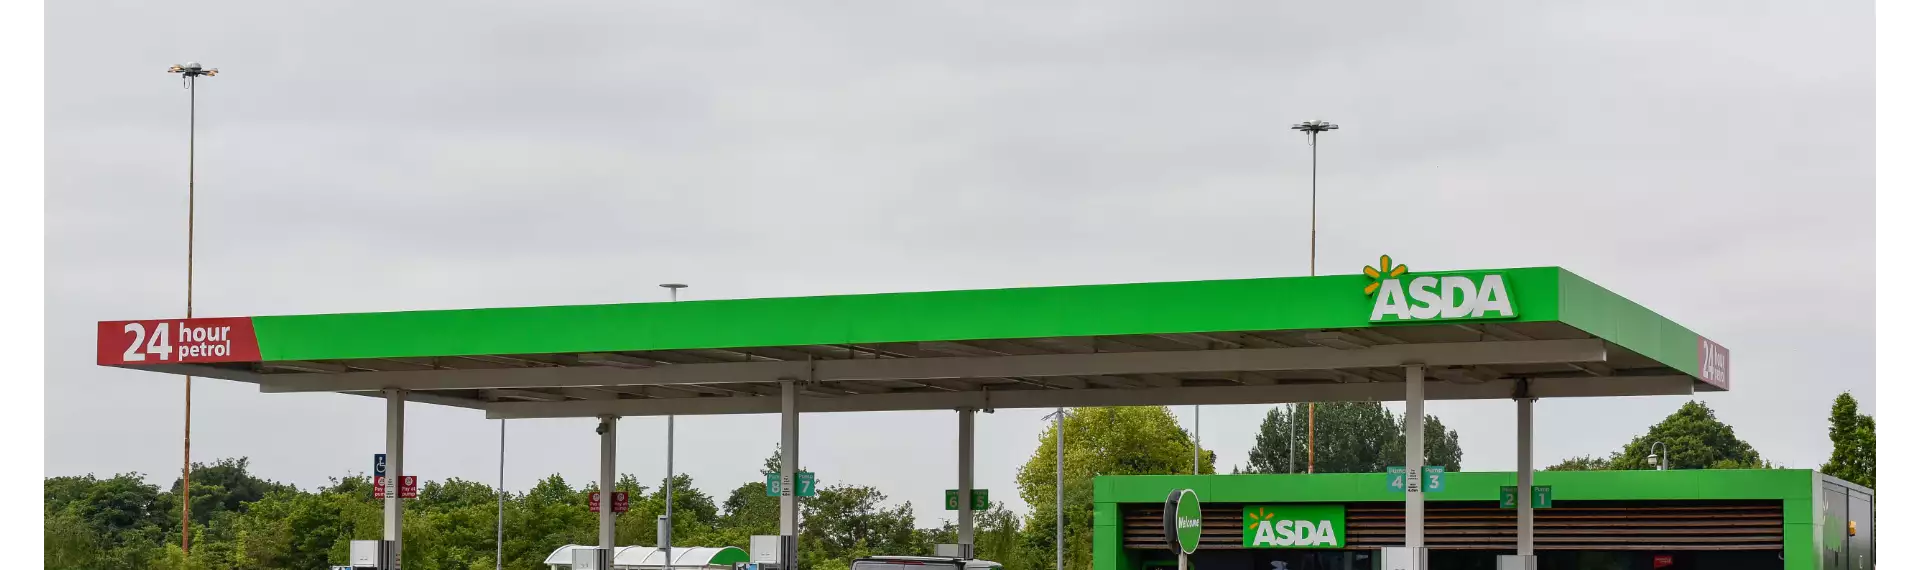 Asda drops unleaded price down to below 1.20 mark for first time since April